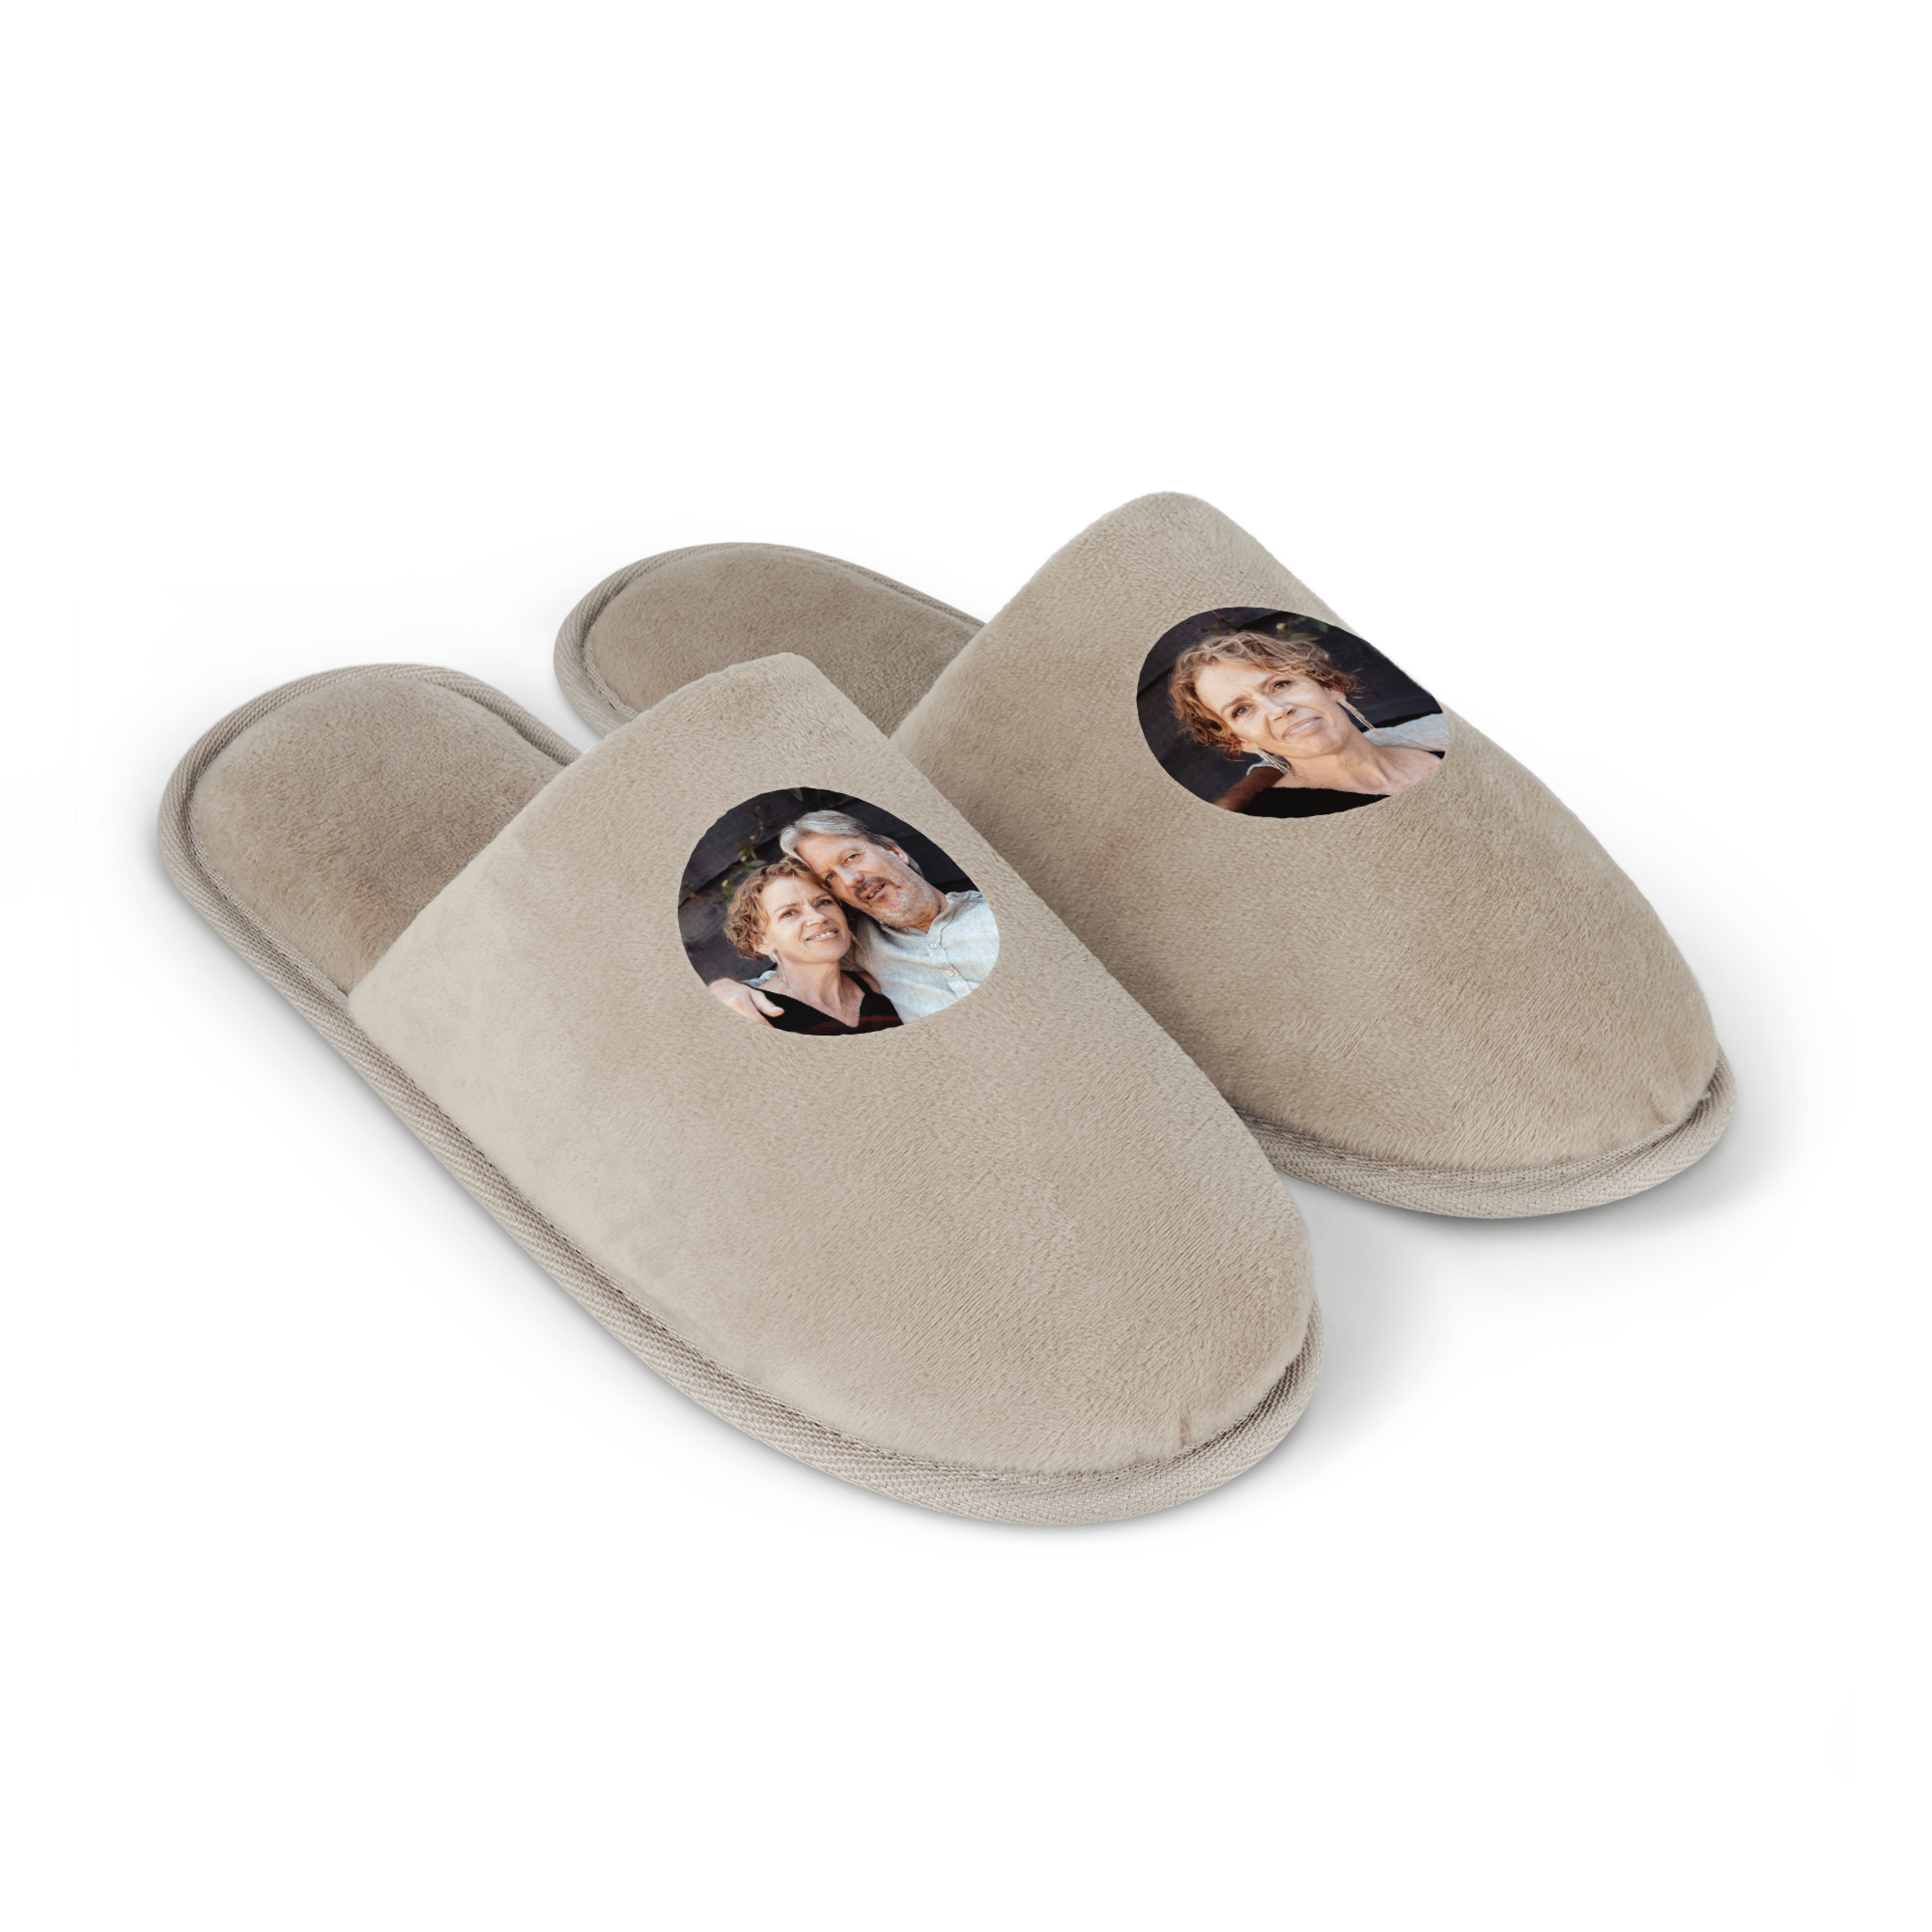 Personalised slippers - Beige - Size 39 - 42